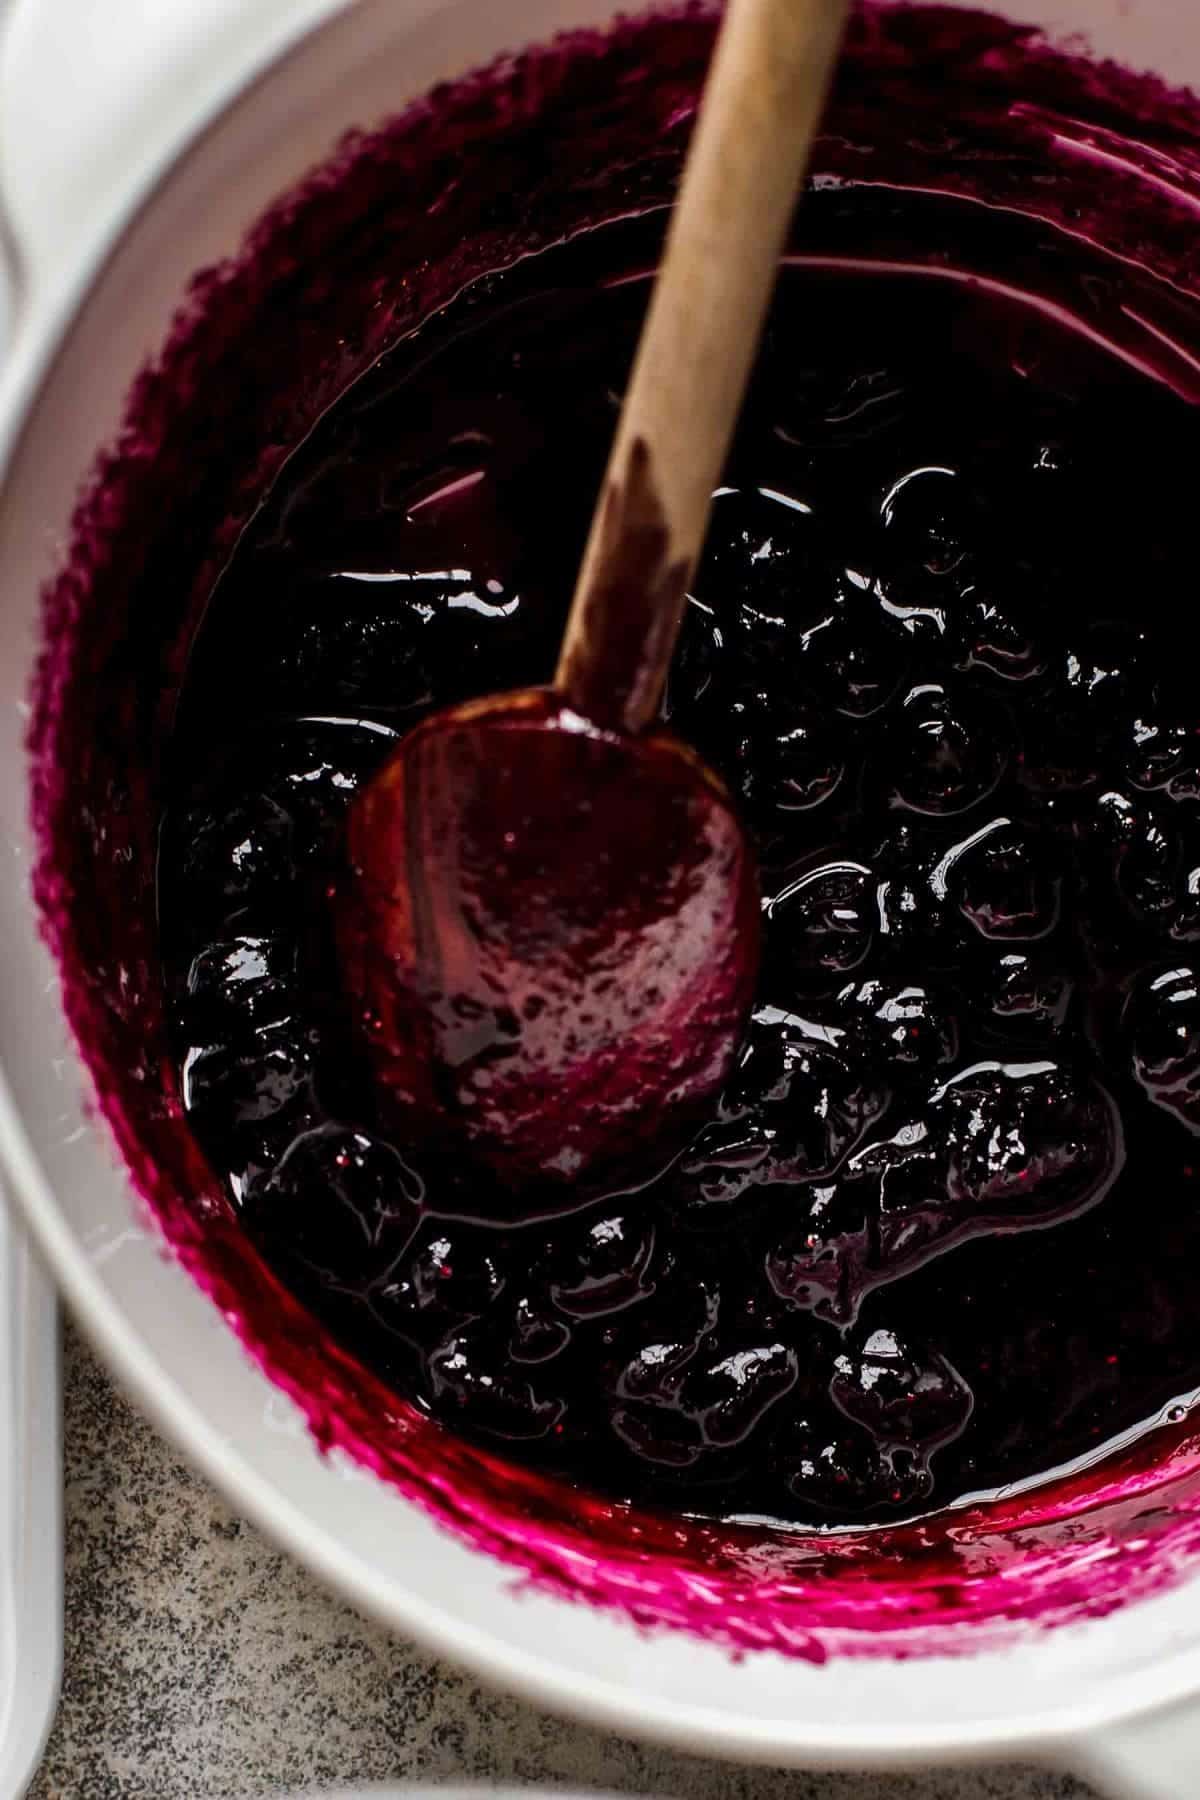 blueberry compote for lemon cheesecake